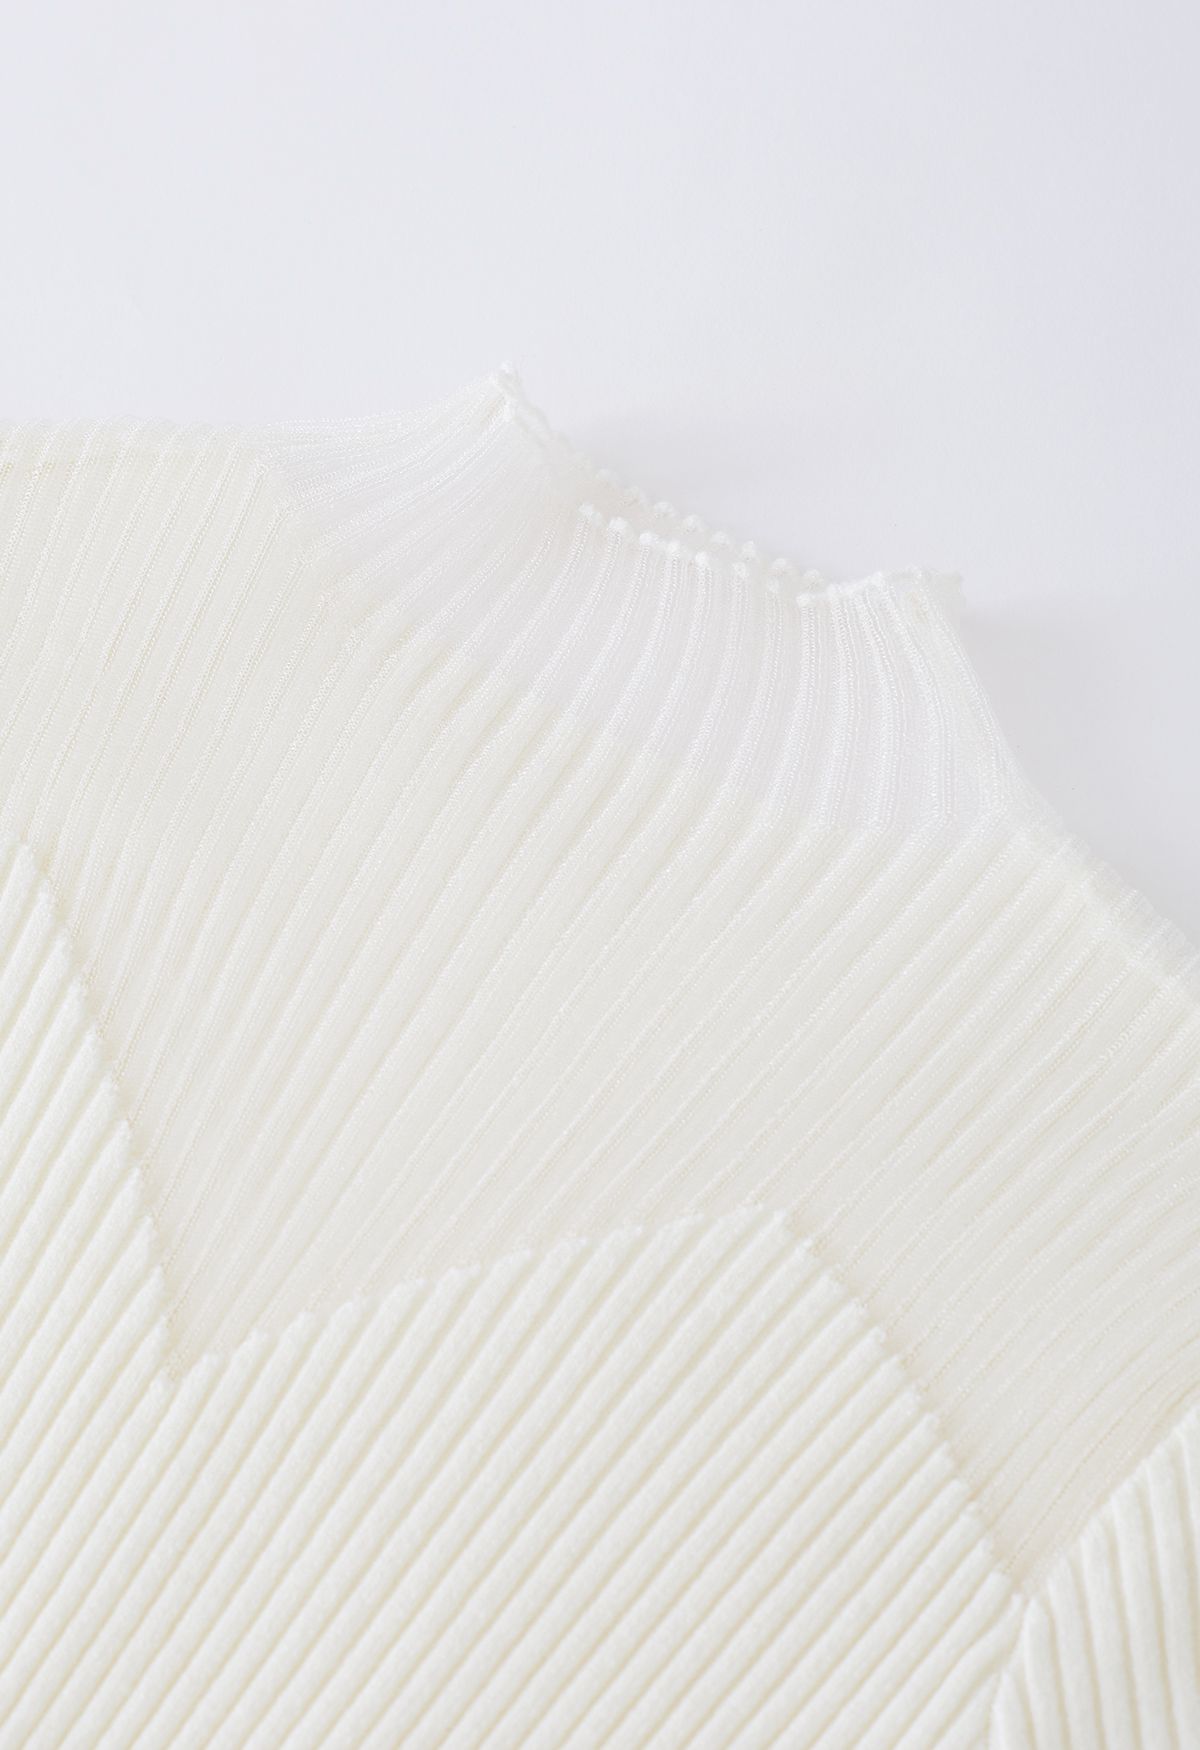 Mock Neck Zigzag Mesh Splicing Knit Top in Ivory